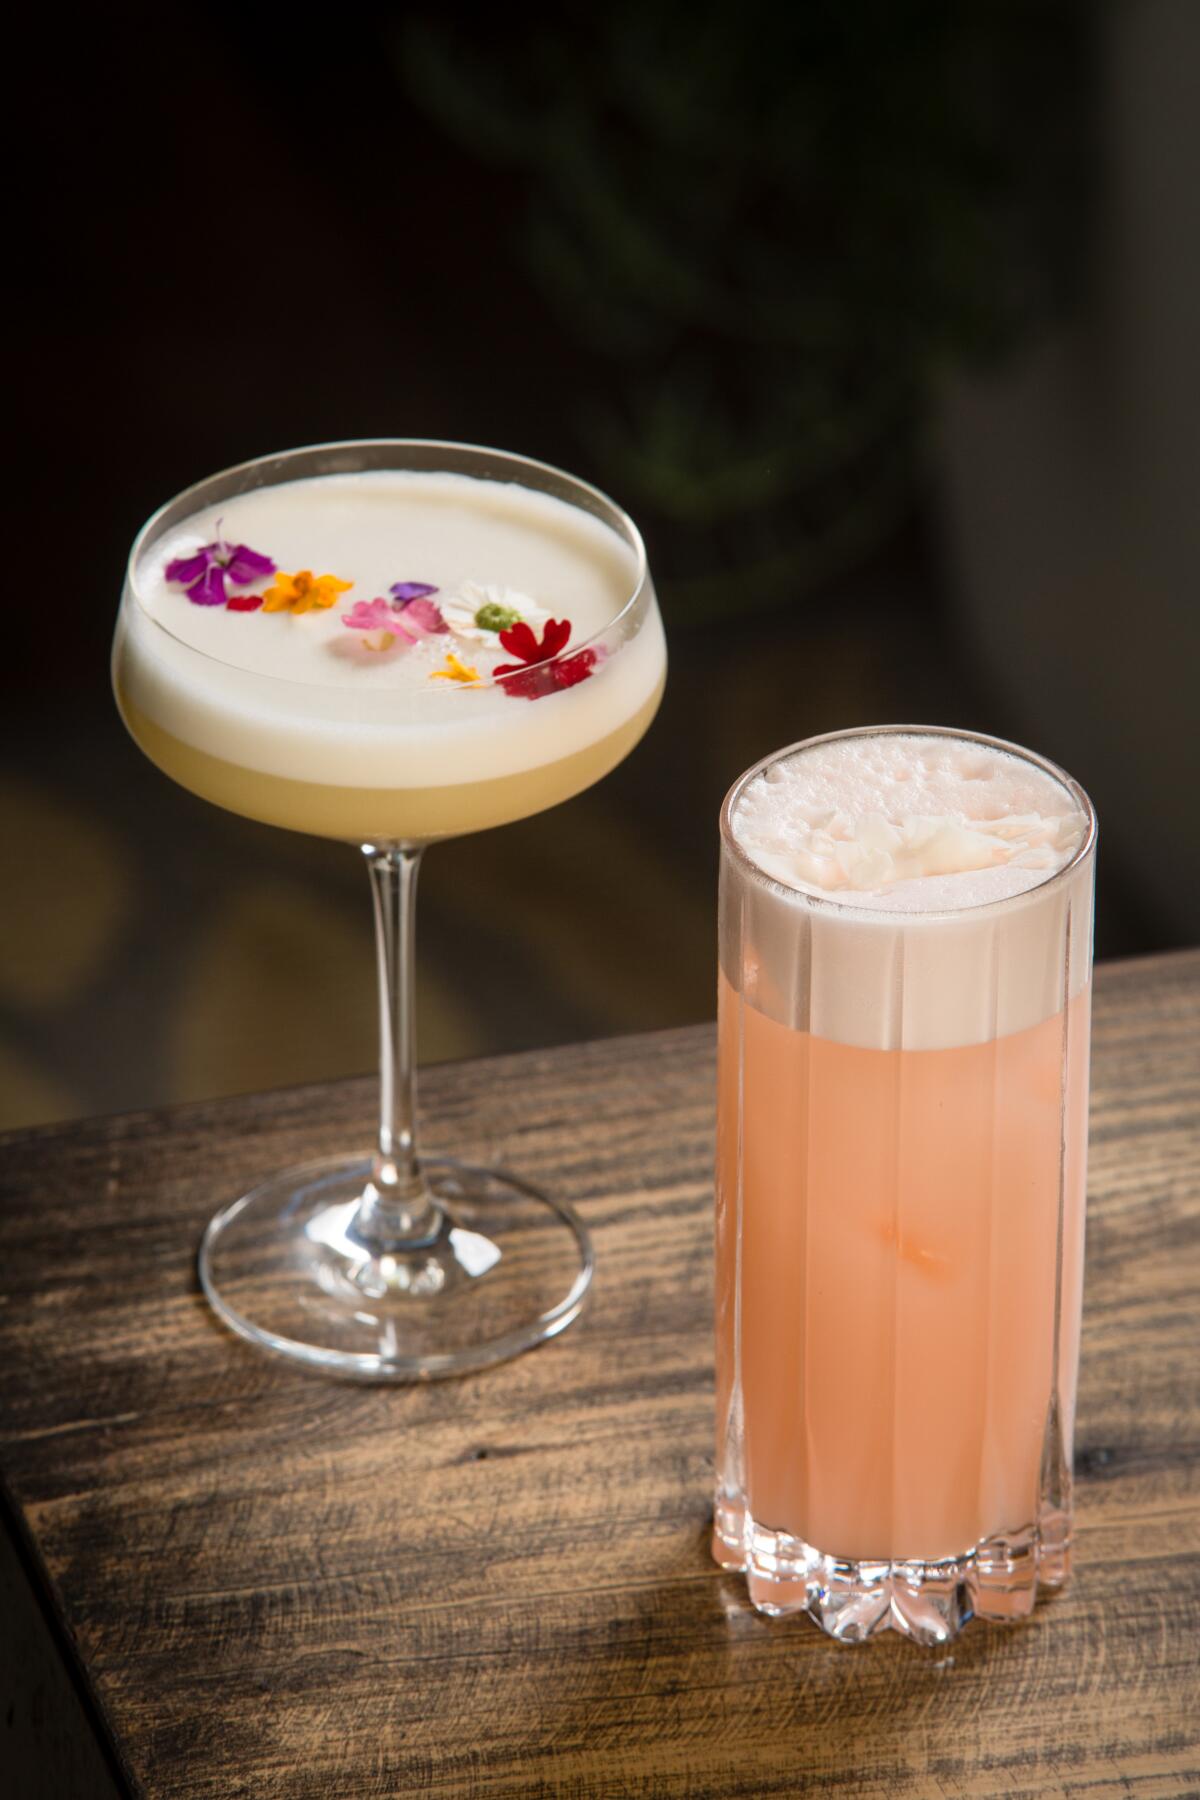 A Laurel cocktail infused with pineapple and a Fizzy Lizzy, a mezcal take on a Ramos Gin Fizz.